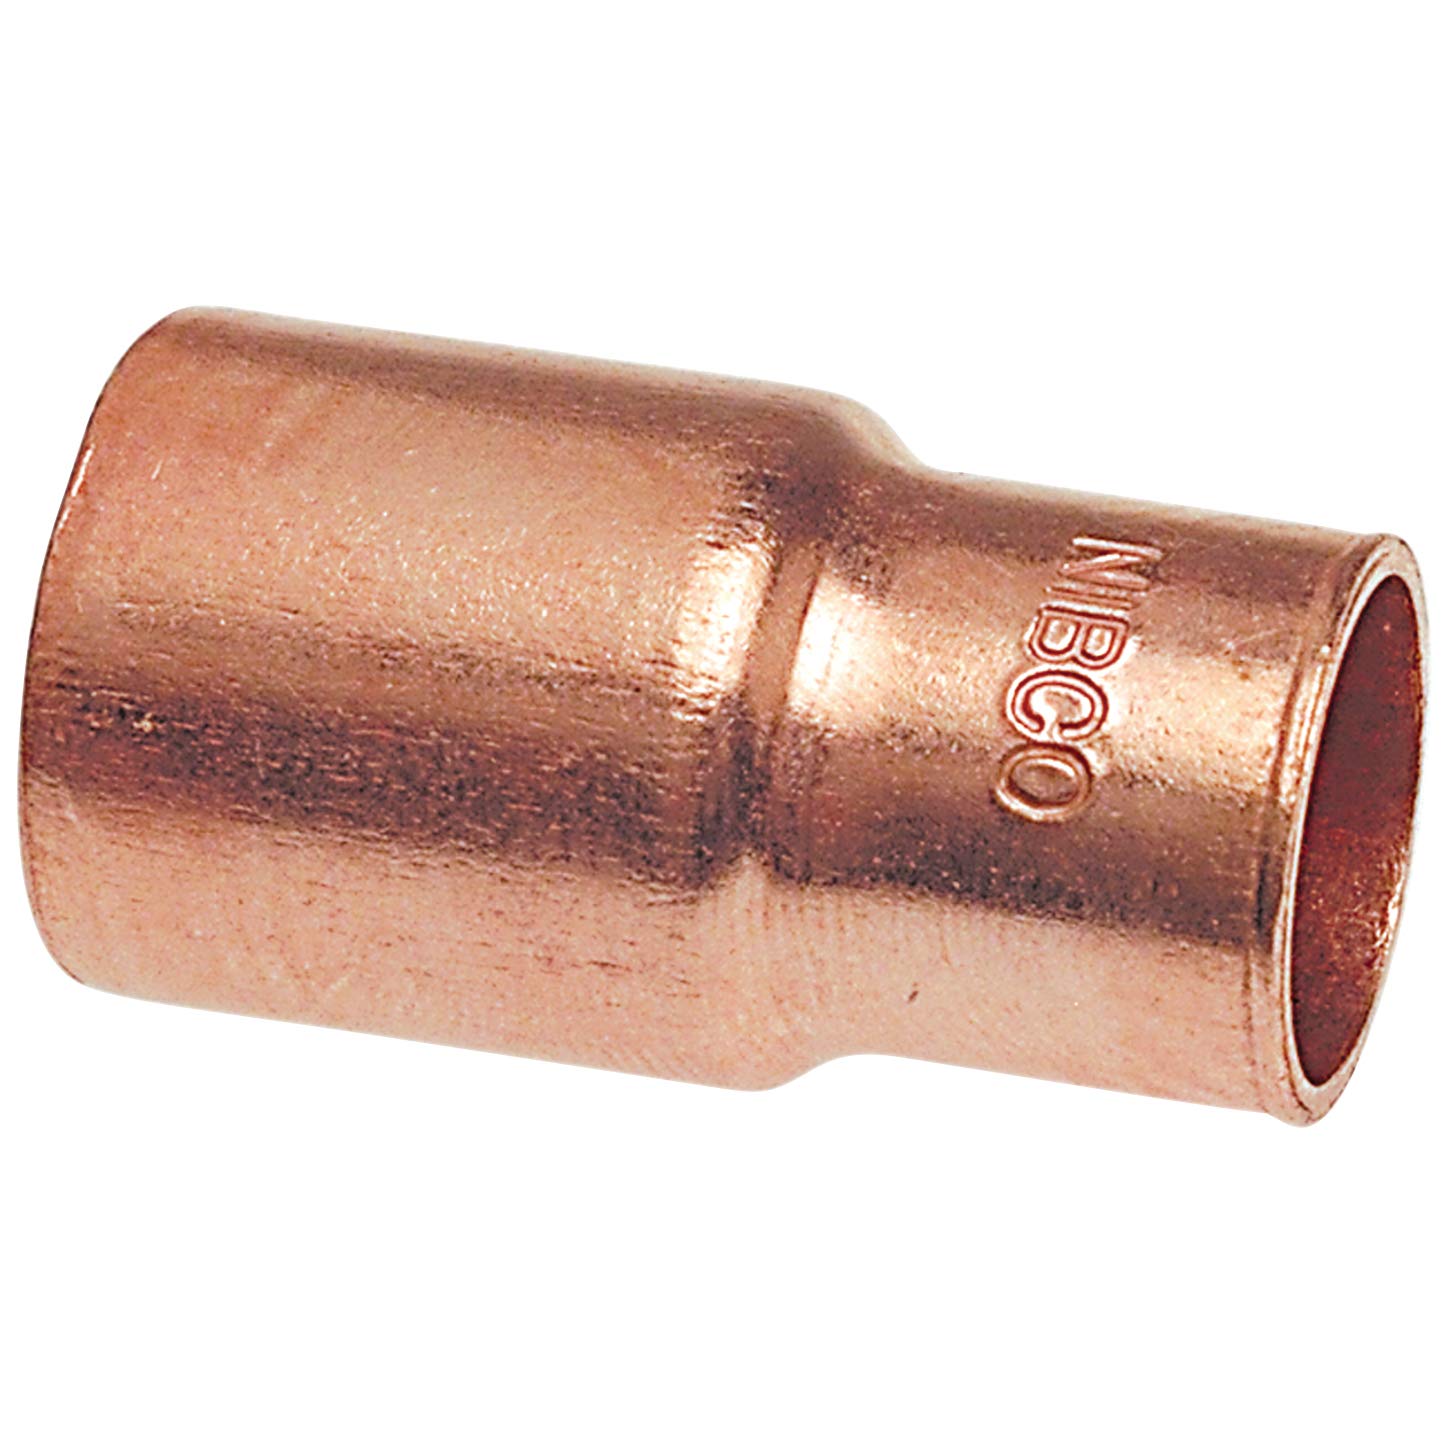 1-1/4" x 3/4" Fitting Reducer Ftg x C - Wrot Copper, 600-2